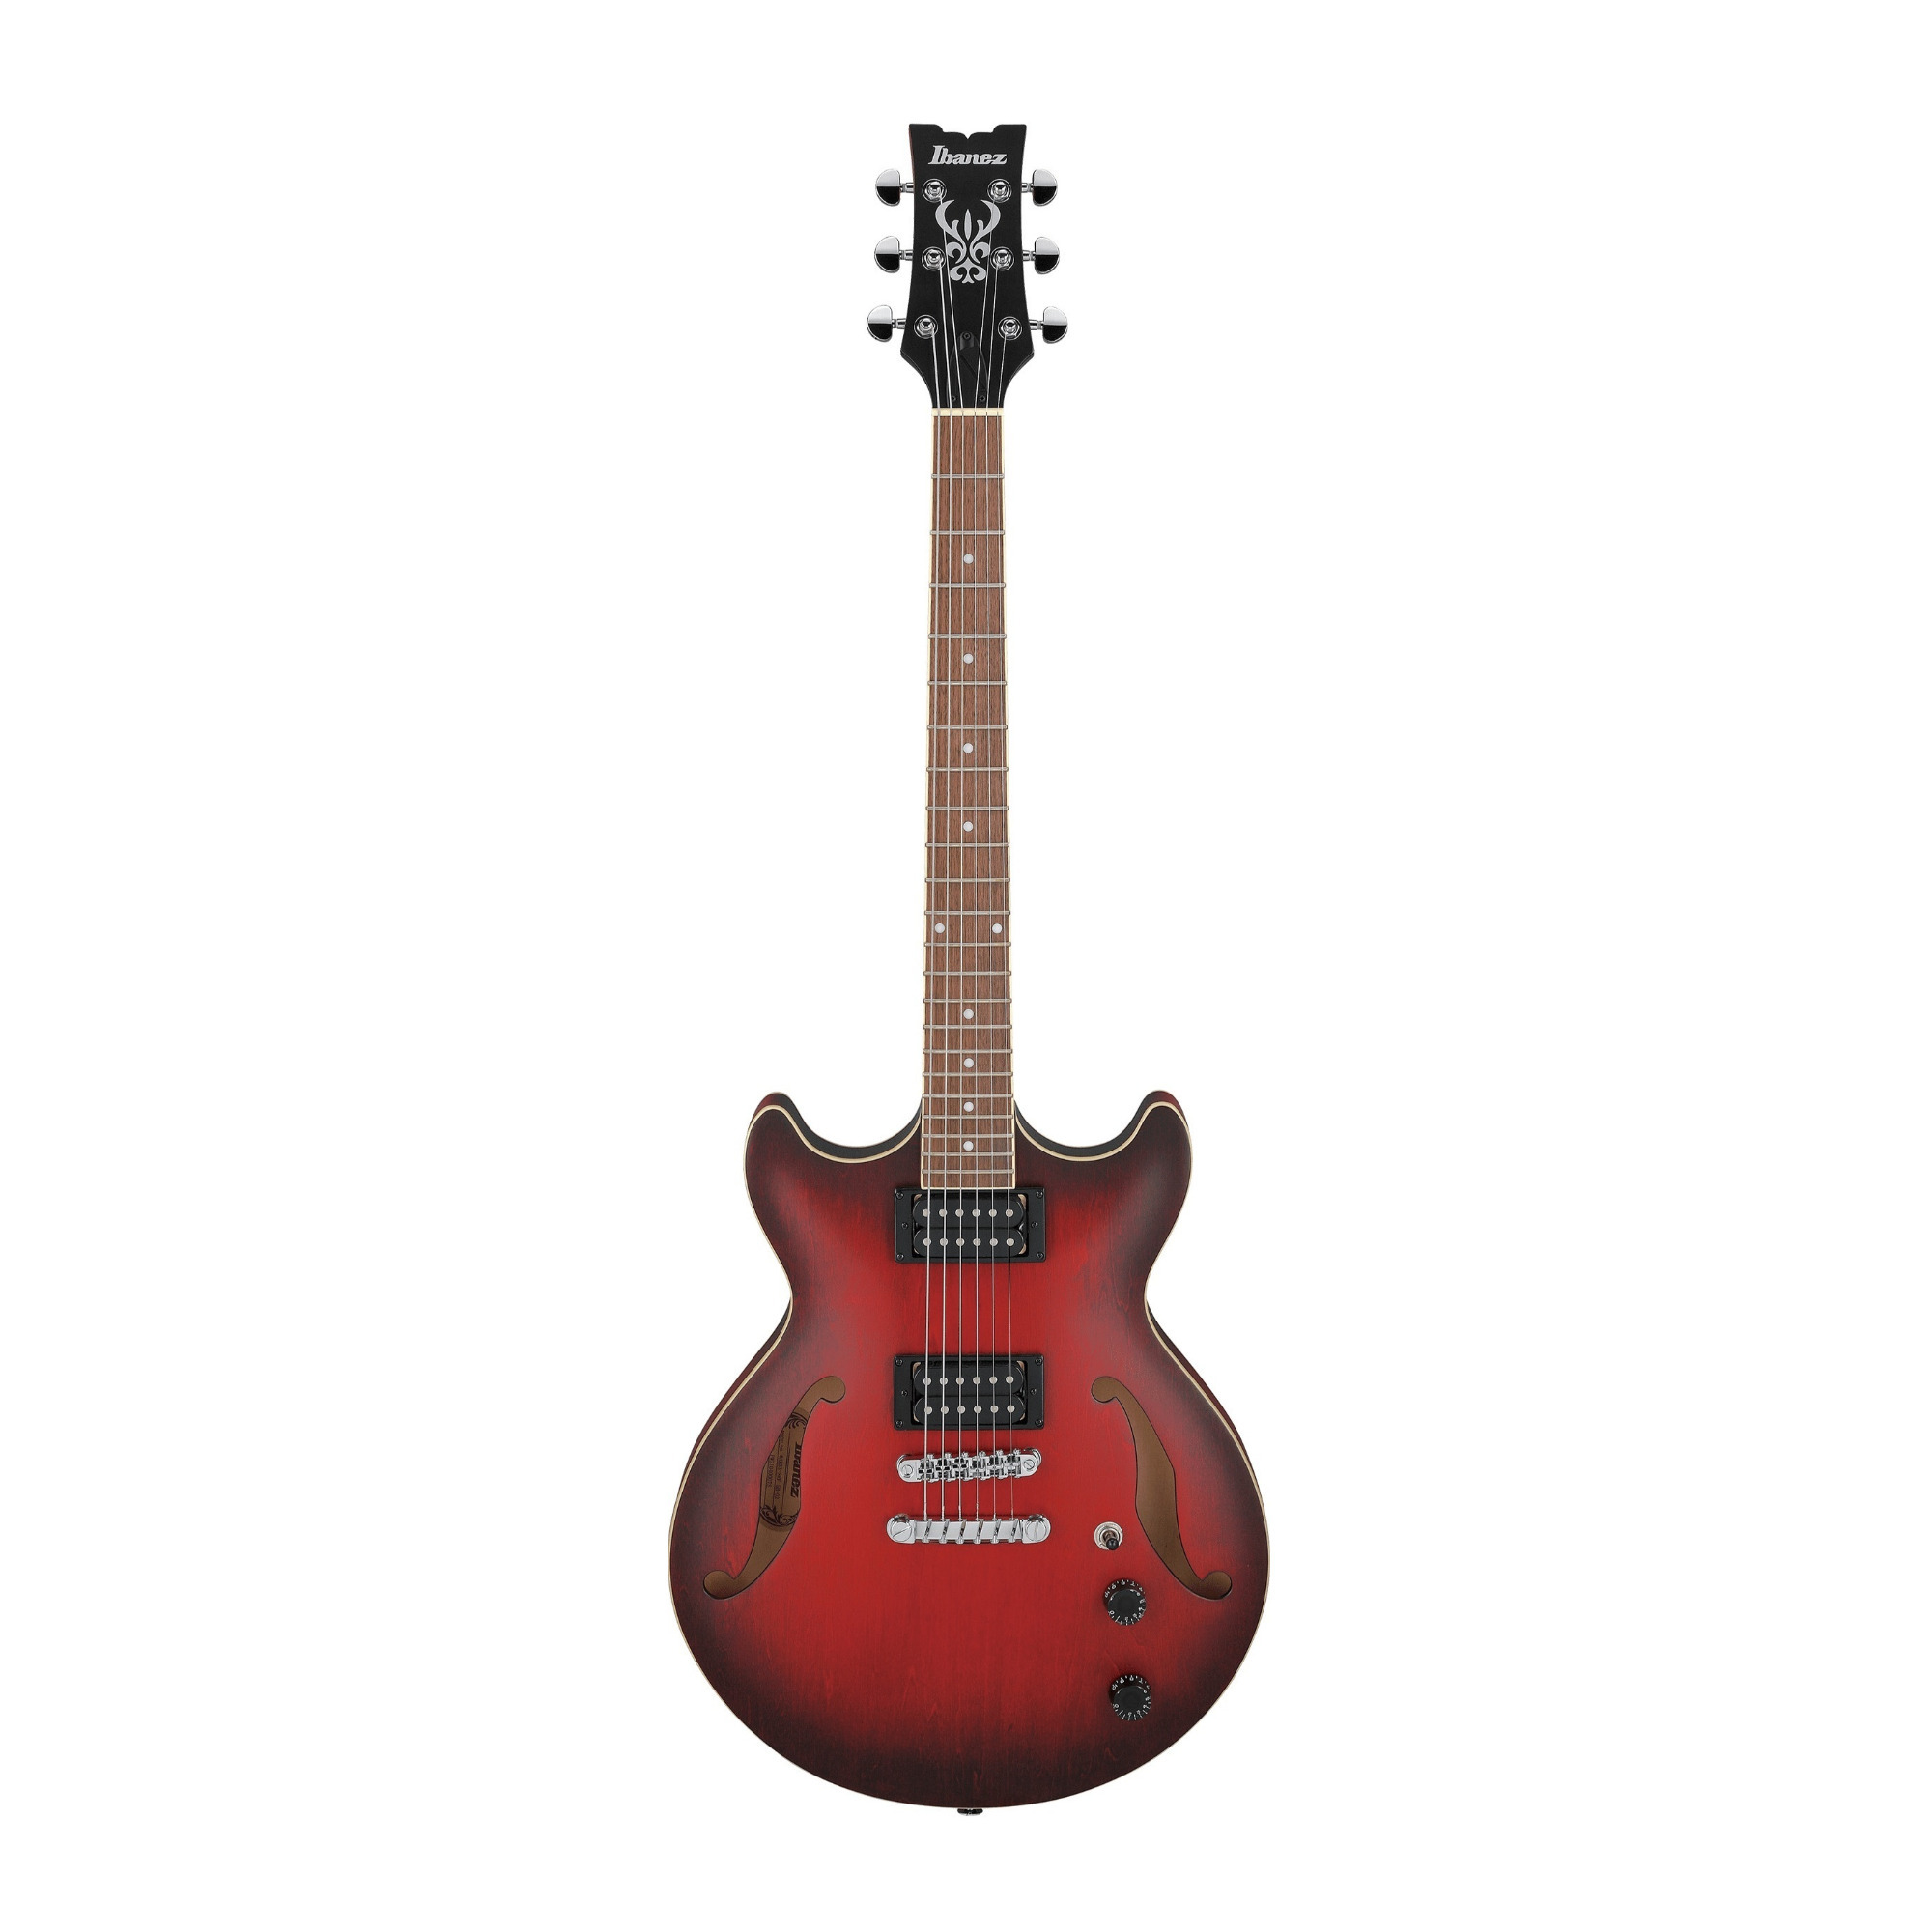 Ibanez AM53 Artcore Series 6-String Hollow-Body Electric Guitar (Right-Handed, Sunburst Red Flat) -  AM53SRF